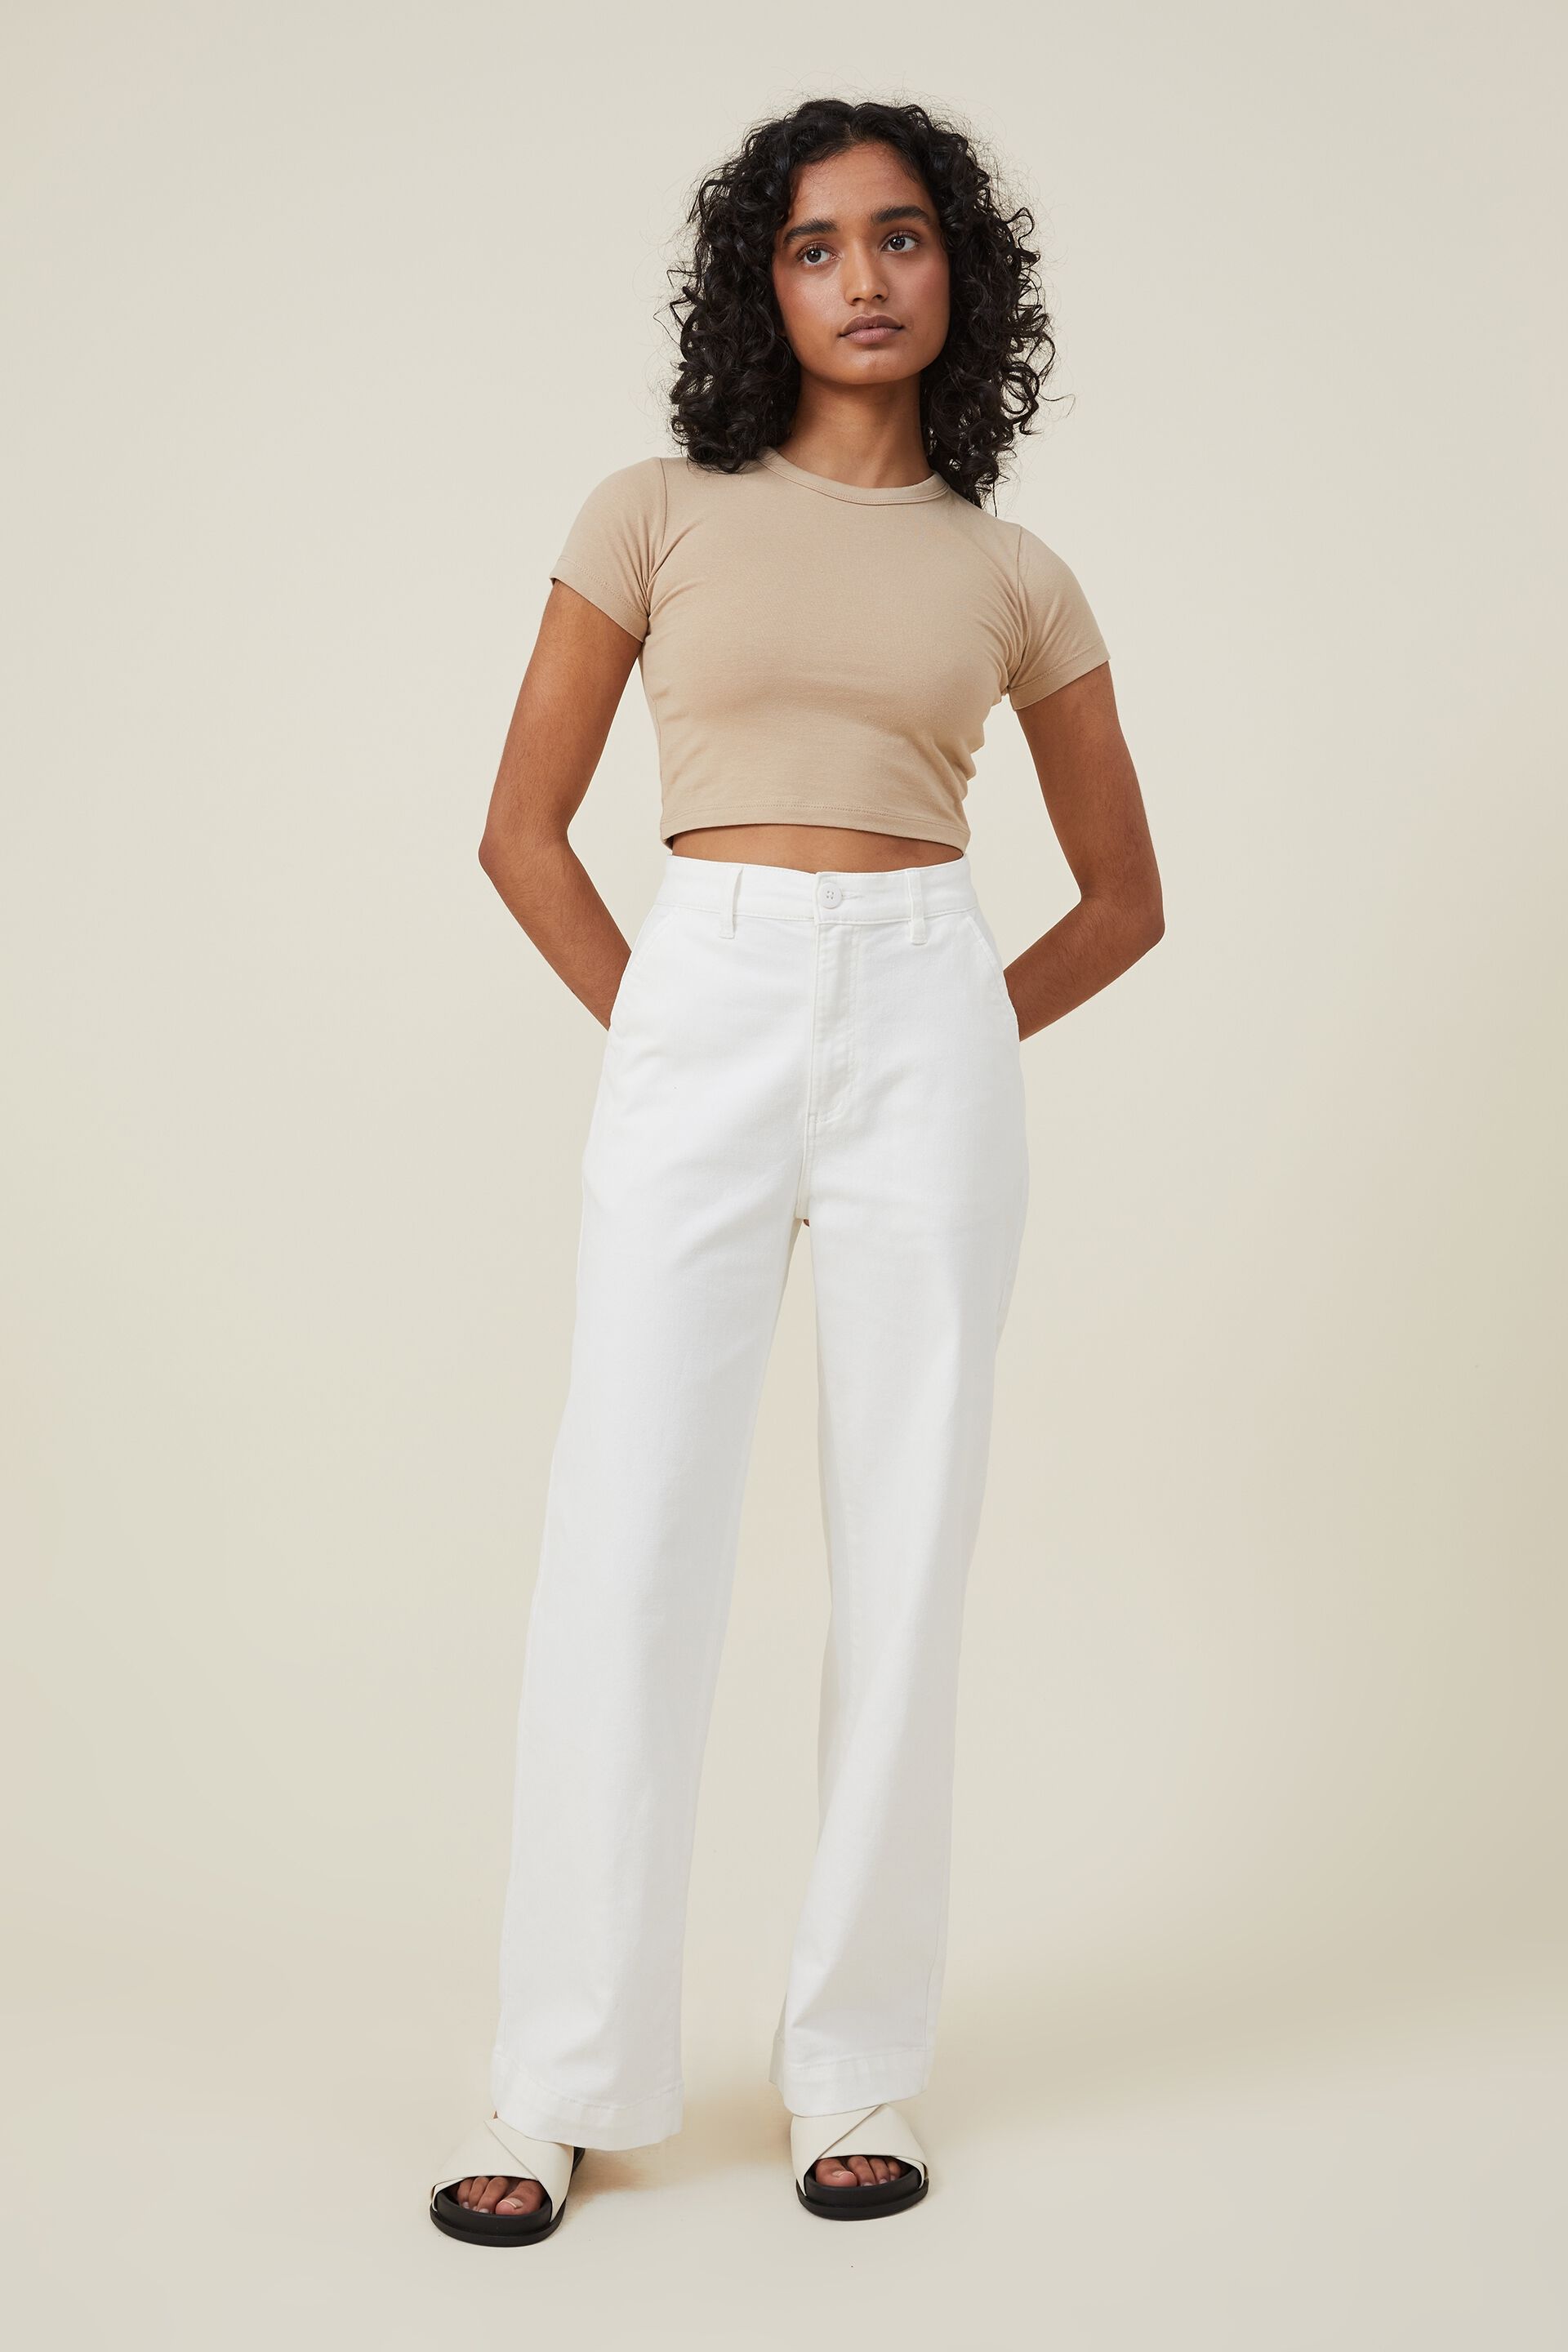 Designer High Waisted Pants for Women  Shop Now on FARFETCH